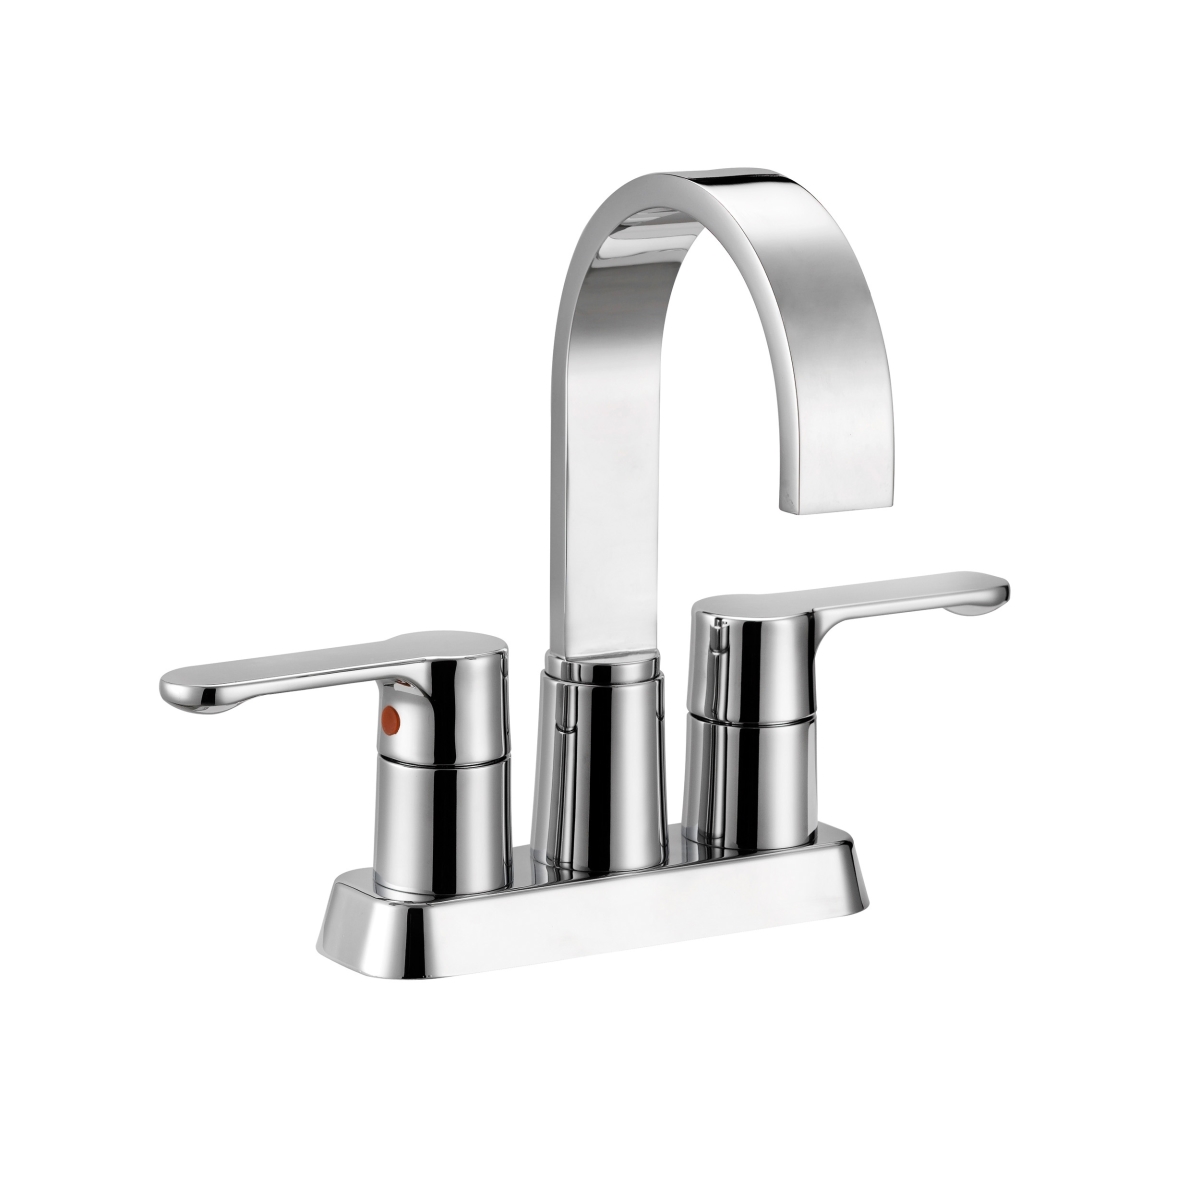 Brf1052c 4 Inch Centerset Dual Handle Stainless Steel 10.9" X 5.8" X 8.6" Bathroom Faucet